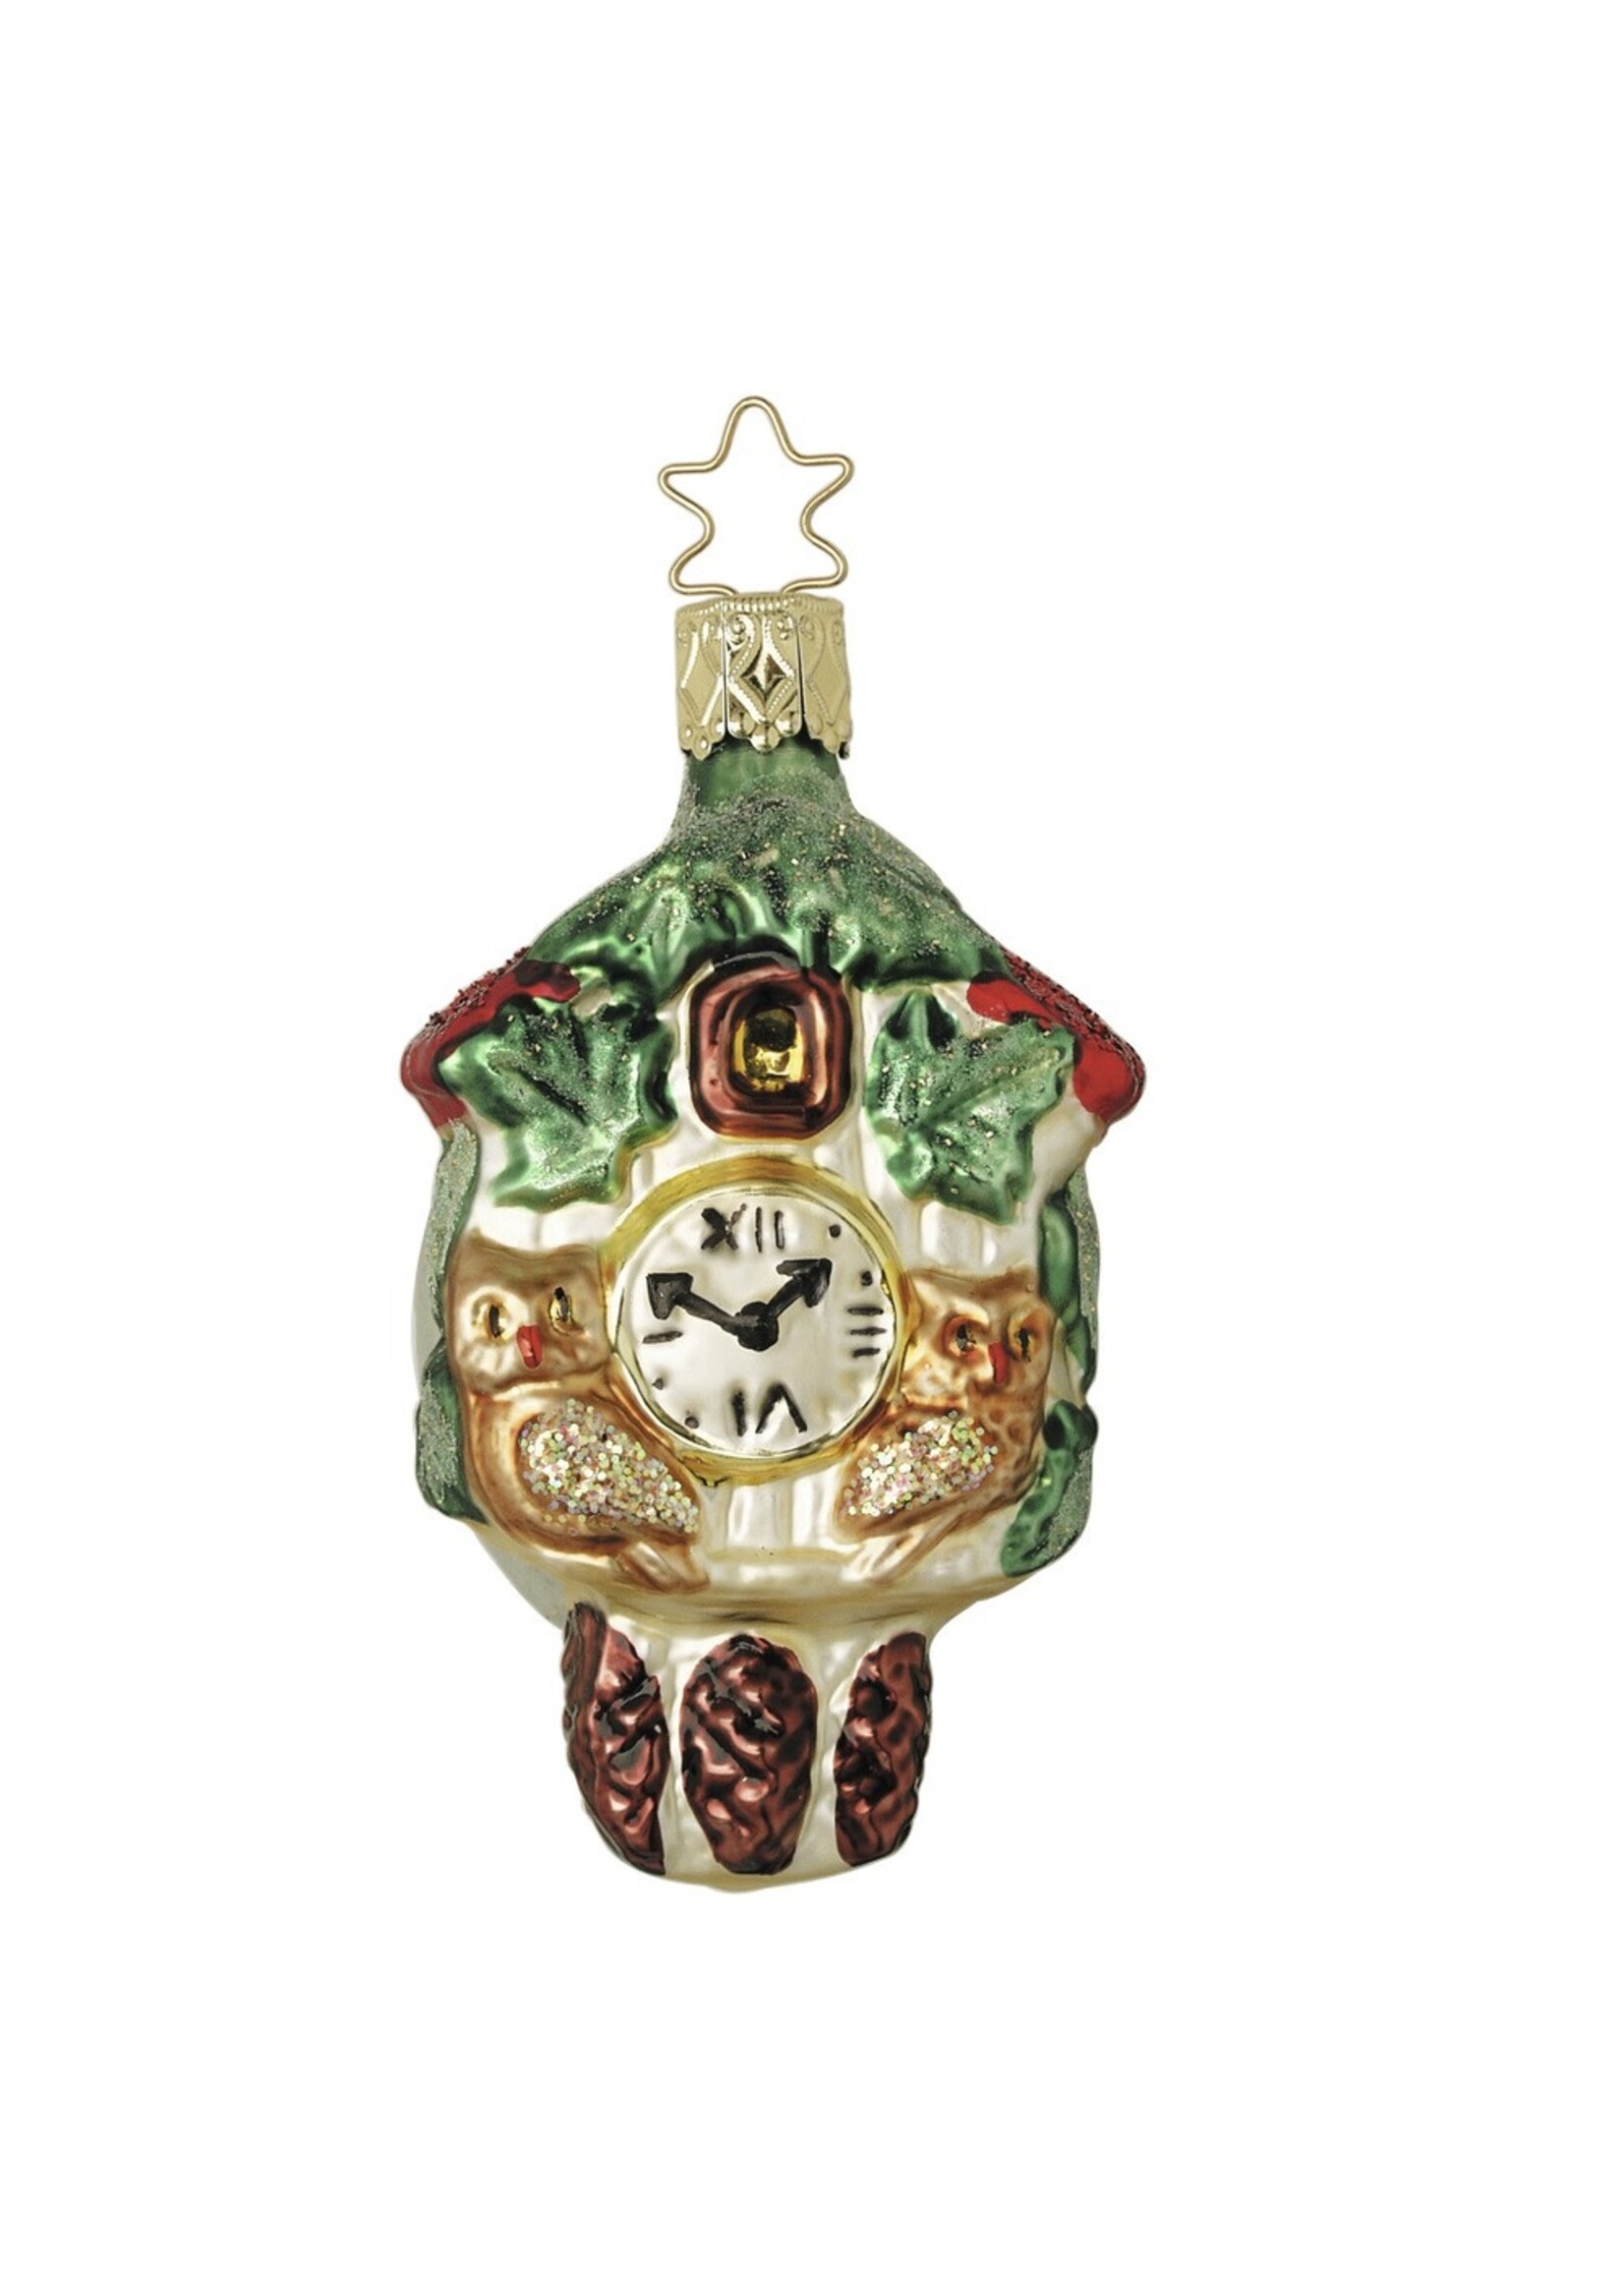 Ornament - Old World Timepiece